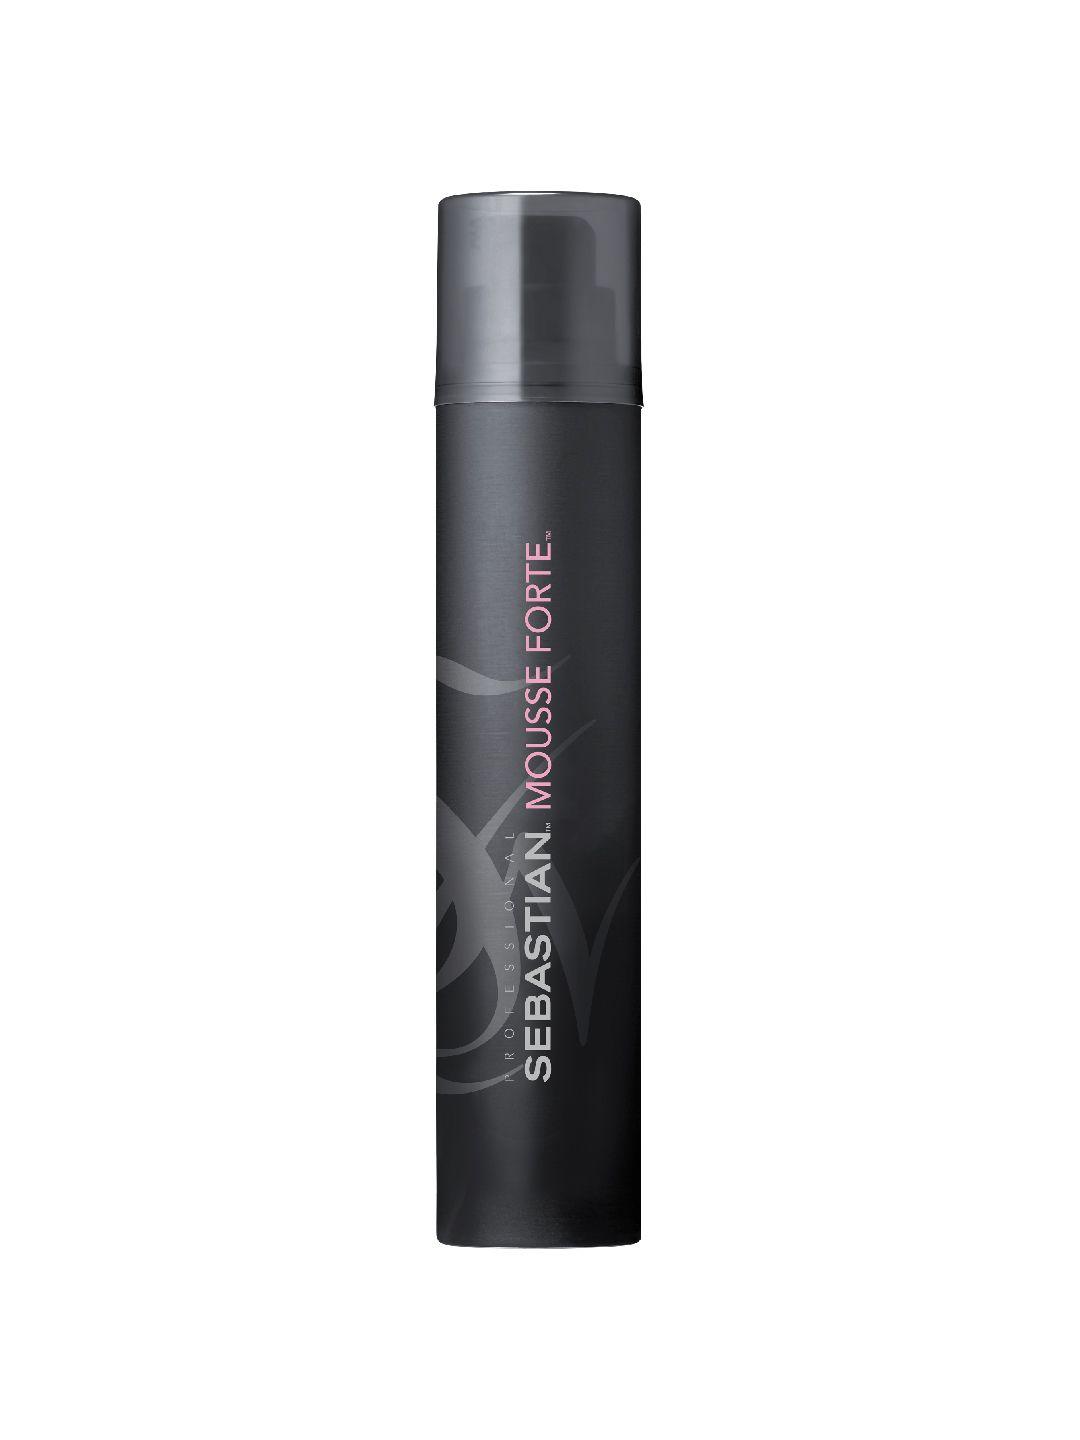 sebastian-professional-mousse-forte-strong-hold-hair-mousse---200ml